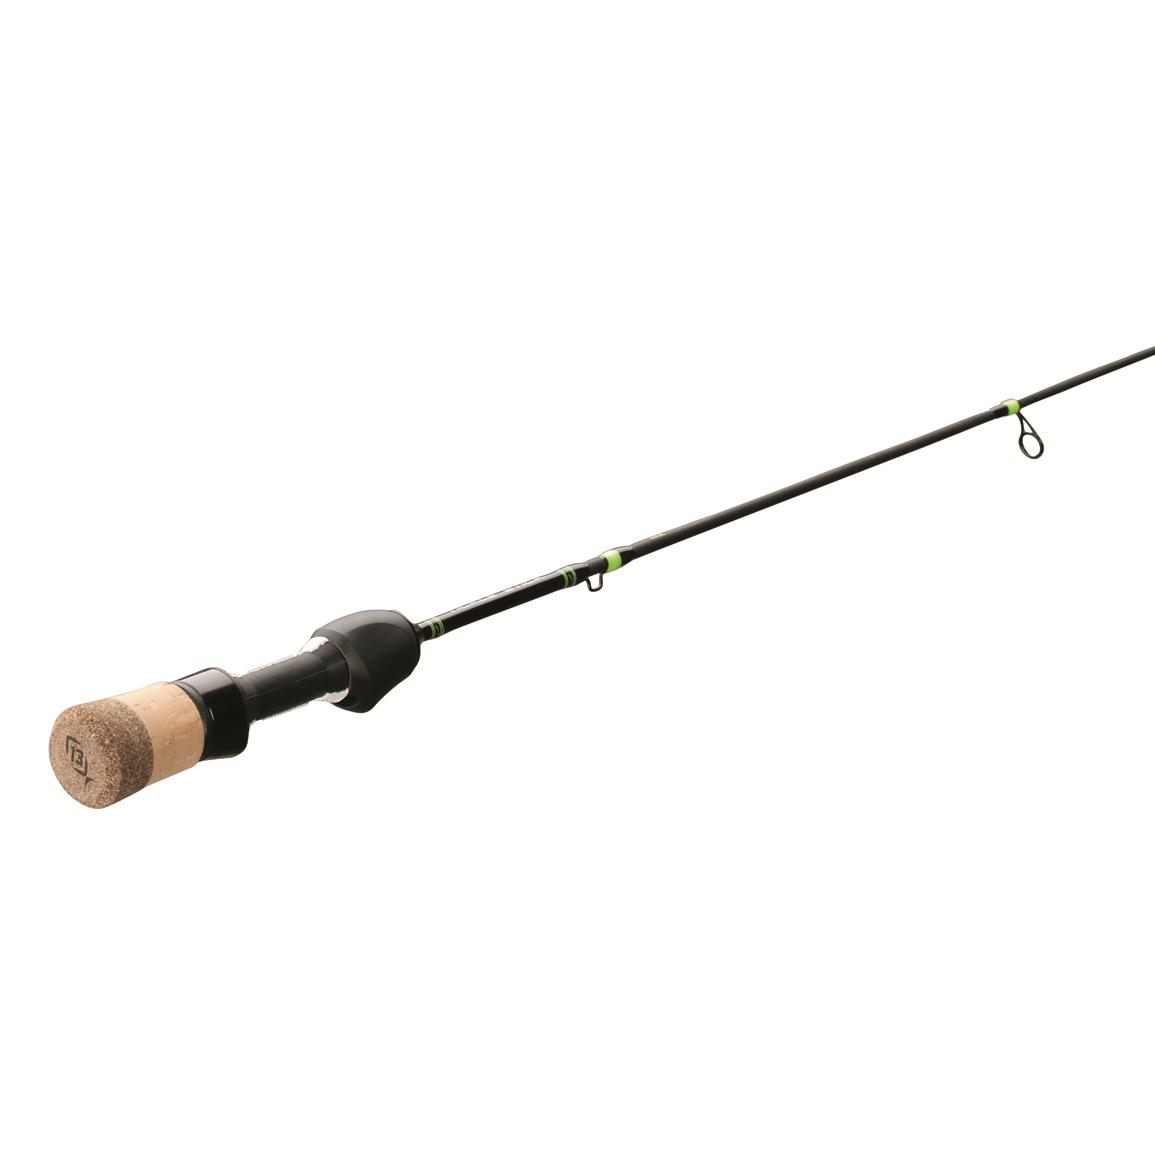 St. Croix Mojo Series Ice Fishing Rod, 36, Medium Power - 723869, Ice Fishing  Rods at Sportsman's Guide